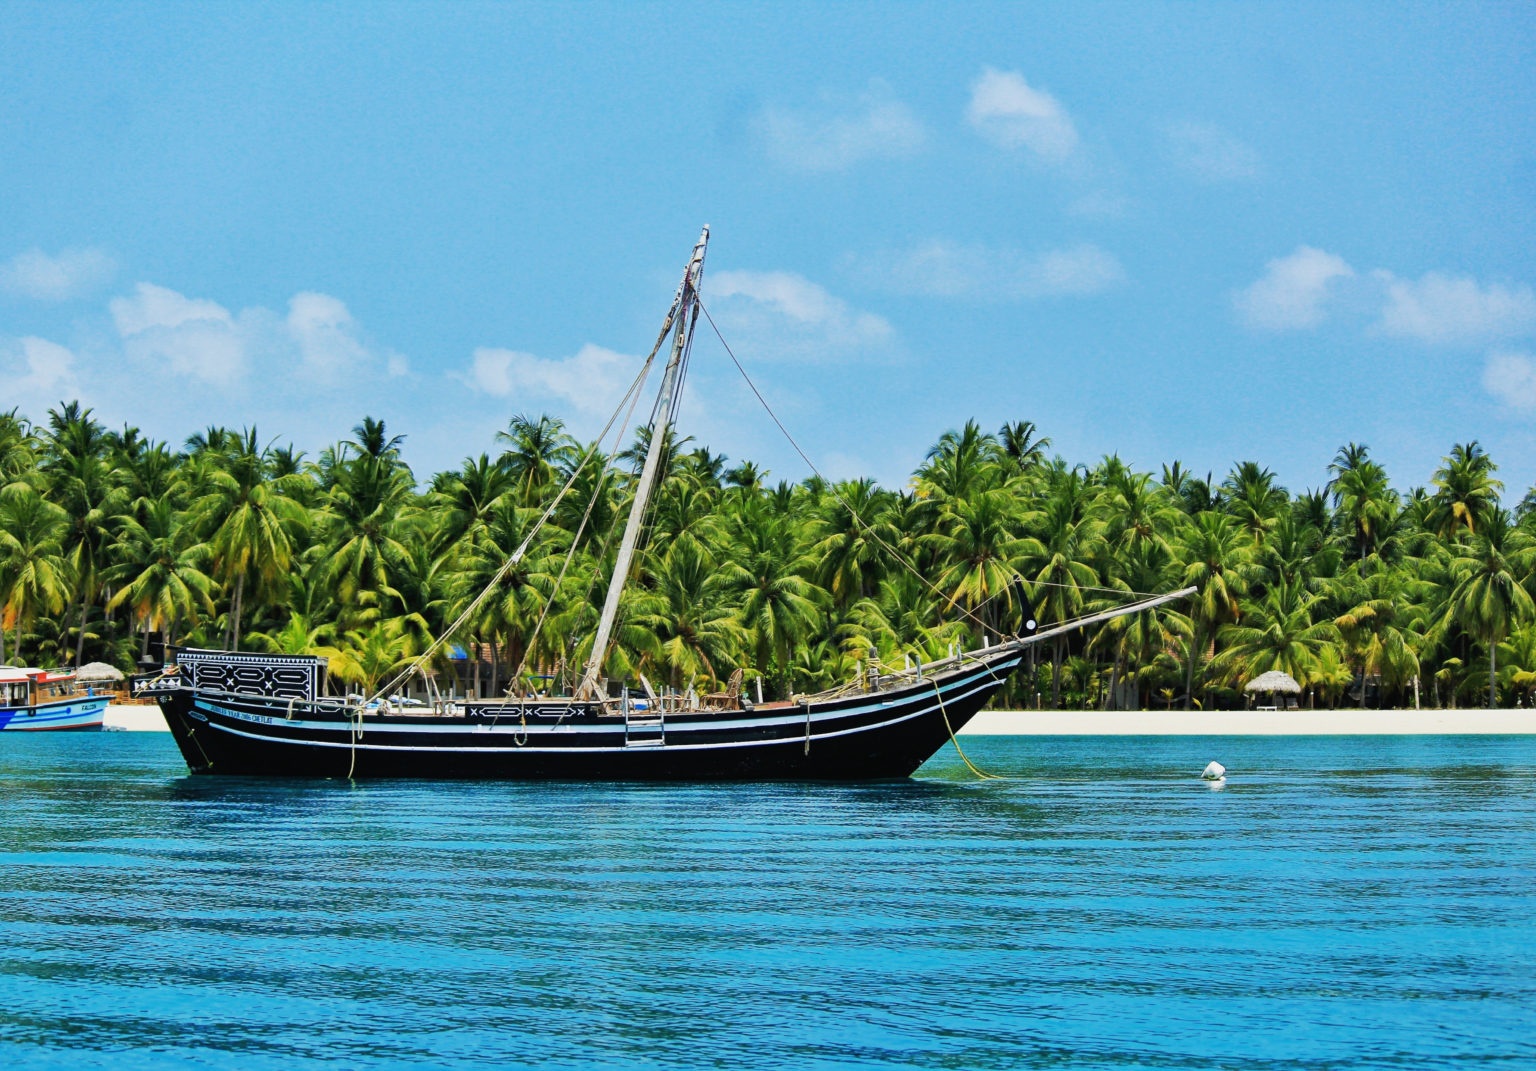 transport and tourism of lakshadweep